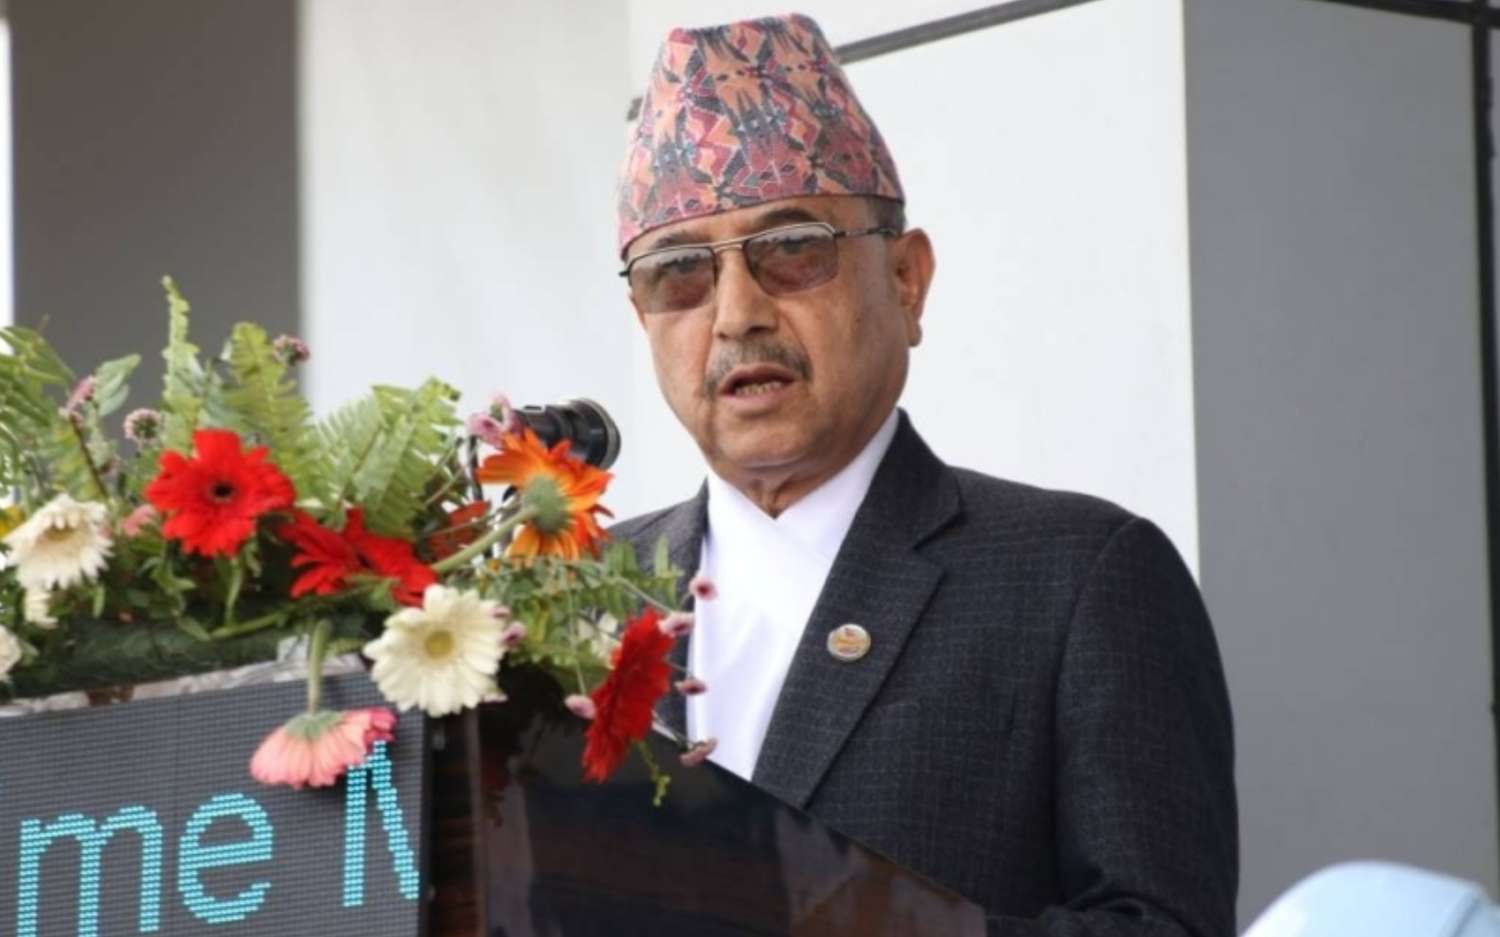 Nepal Ready to Deploy 10,000 Troops for International Peacekeeping: DPM Khadka